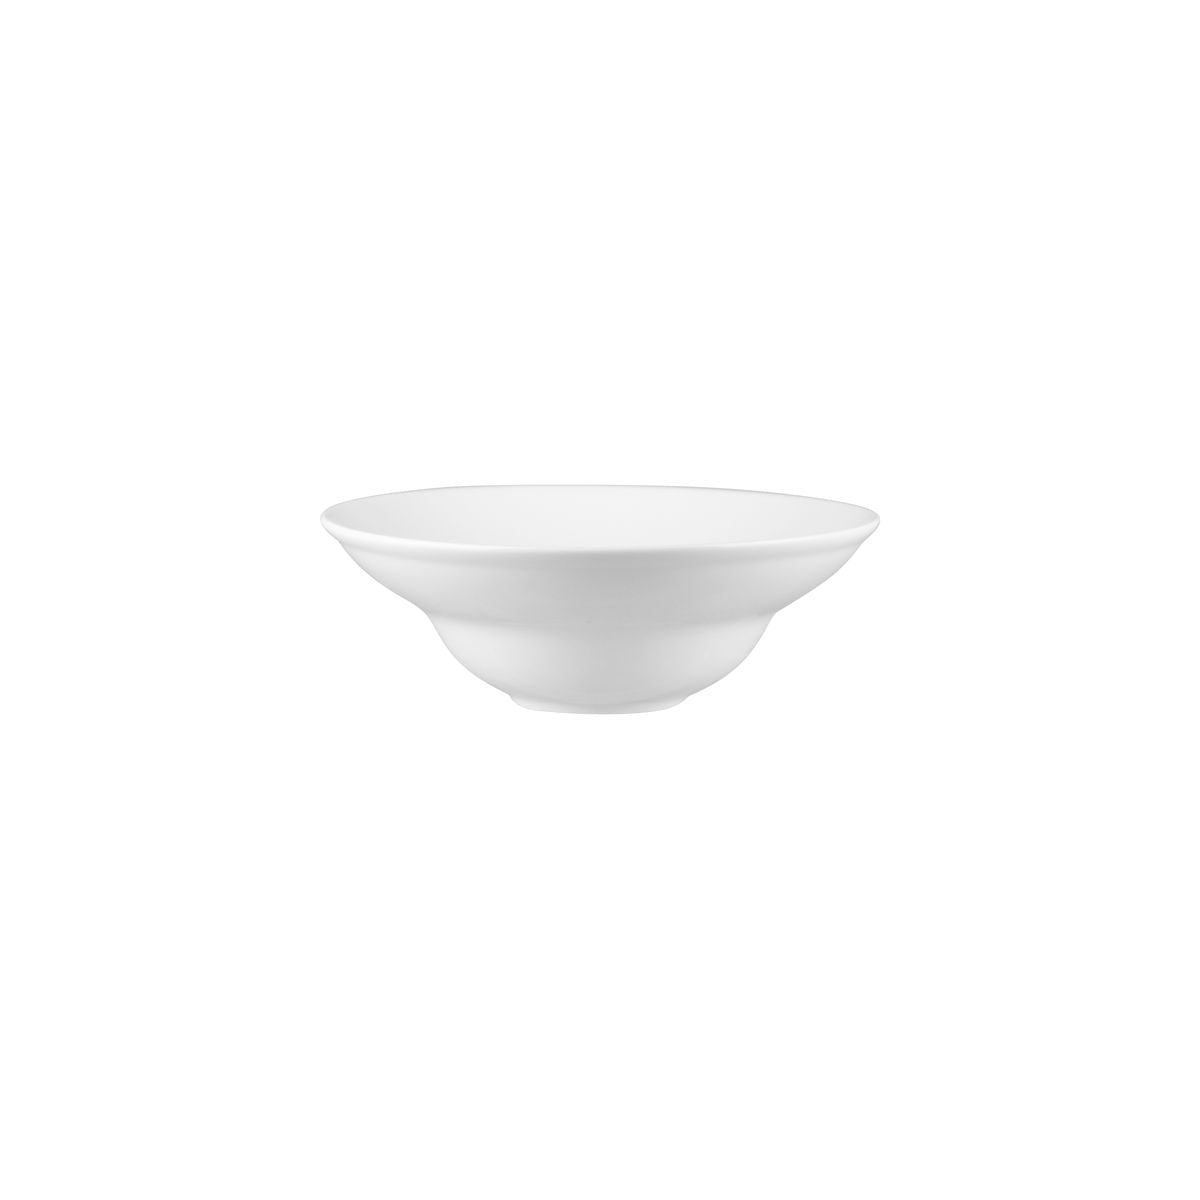 Deep Soup / Pasta Bowl - 230Mm, Classic Gourmet from Rak Porcelain. Deep, made out of Porcelain and sold in boxes of 12. Hospitality quality at wholesale price with The Flying Fork! 